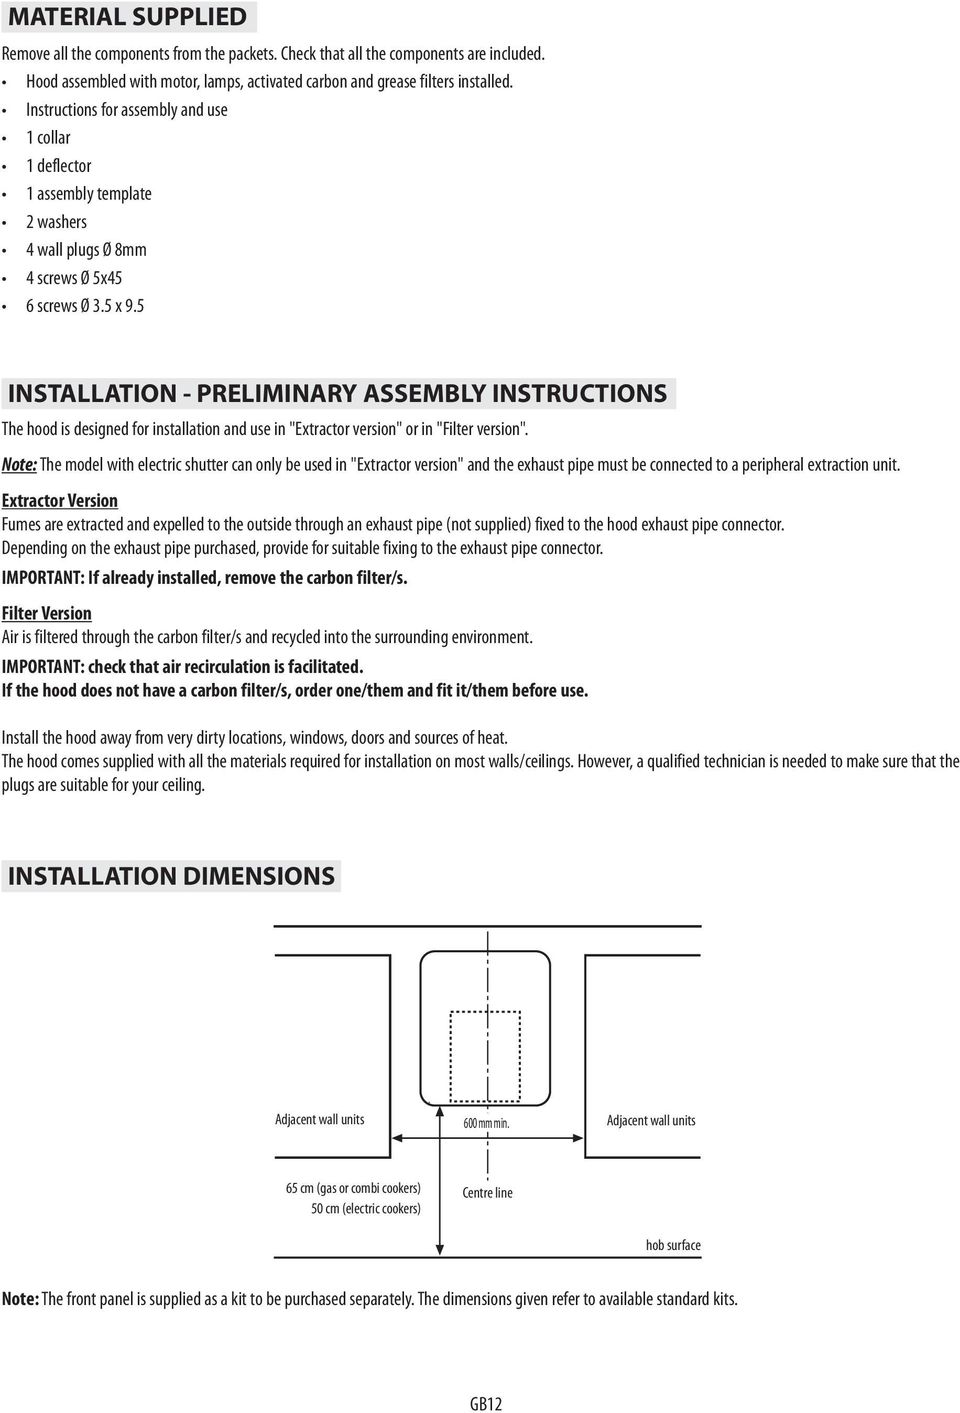 5 INSTALLATION - PRELIMINARY ASSEMBLY INSTRUCTIONS The hood is designed for installation and use in "Extractor version" or in "Filter version".